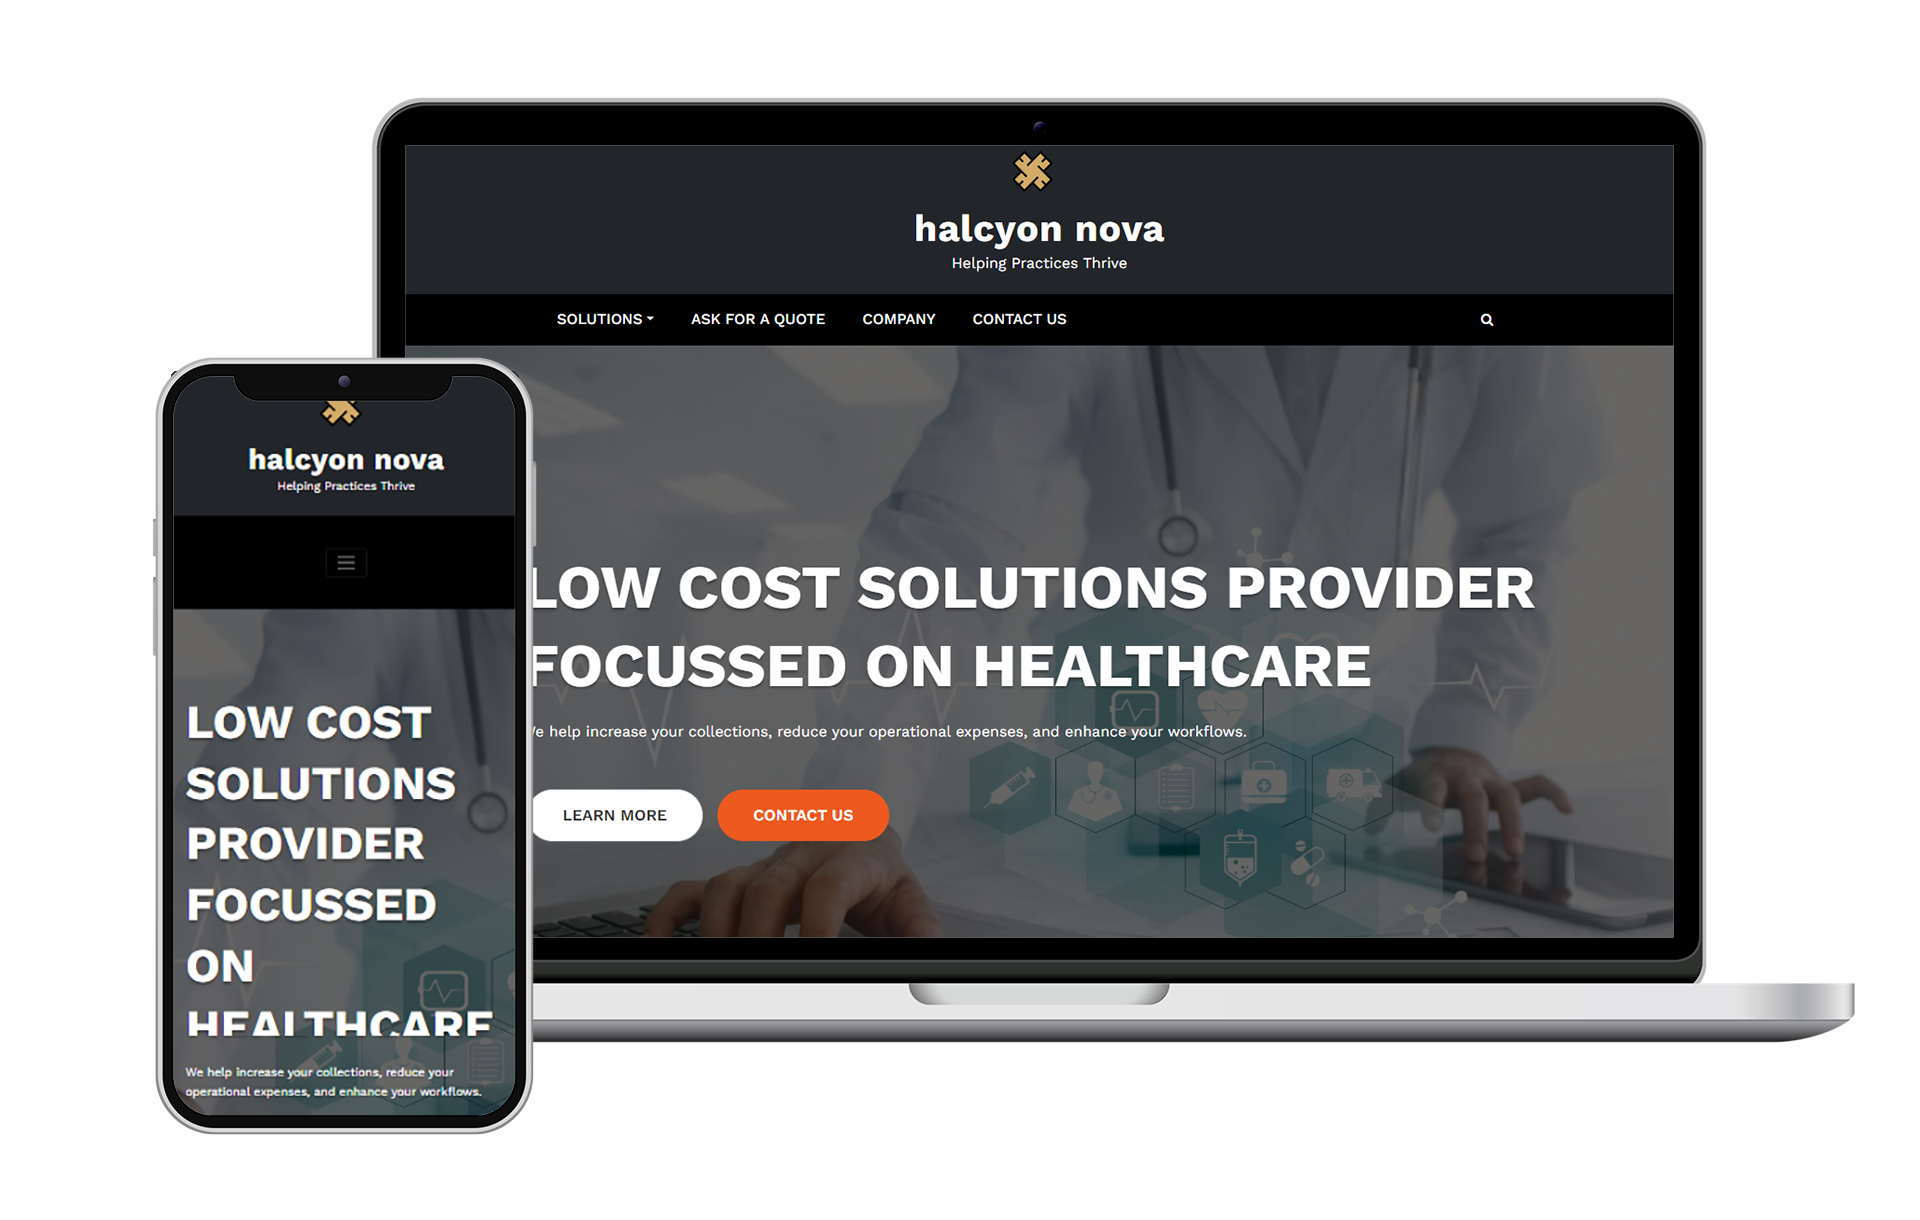 halcyonnova mobile and laptop user interface